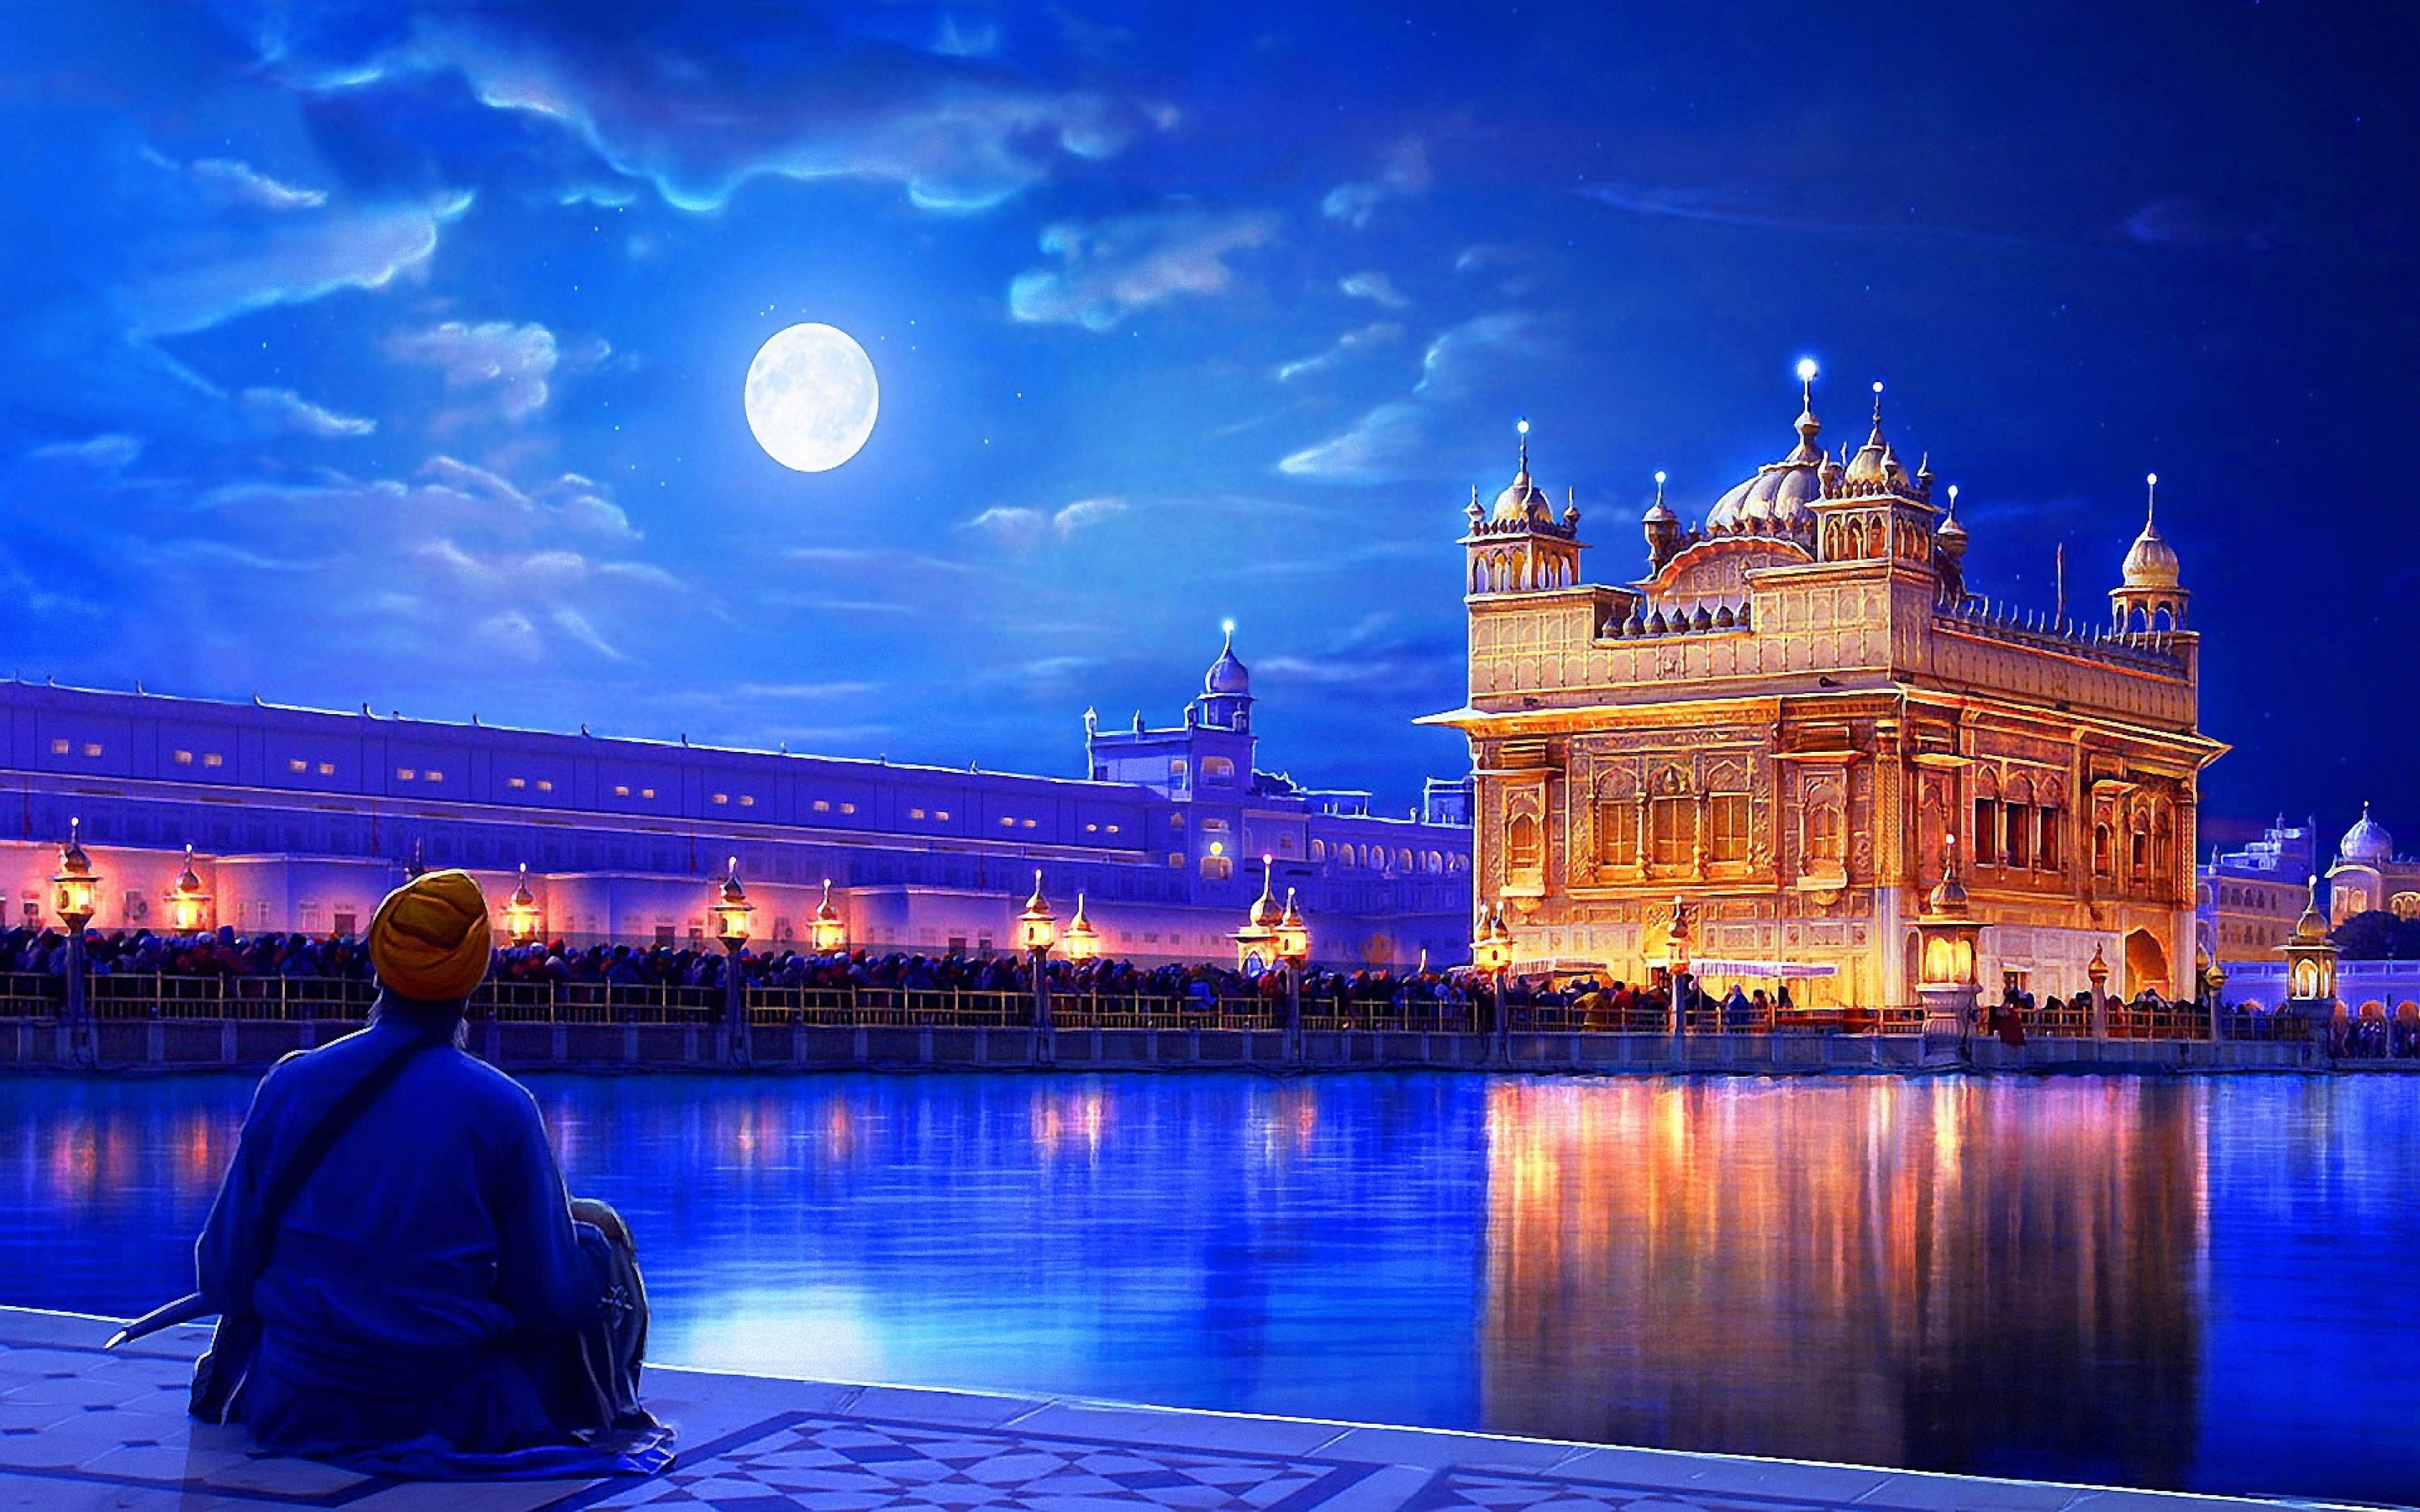 Golden Temple Amritsar India for 2880 x 1800 Retina Display resolution